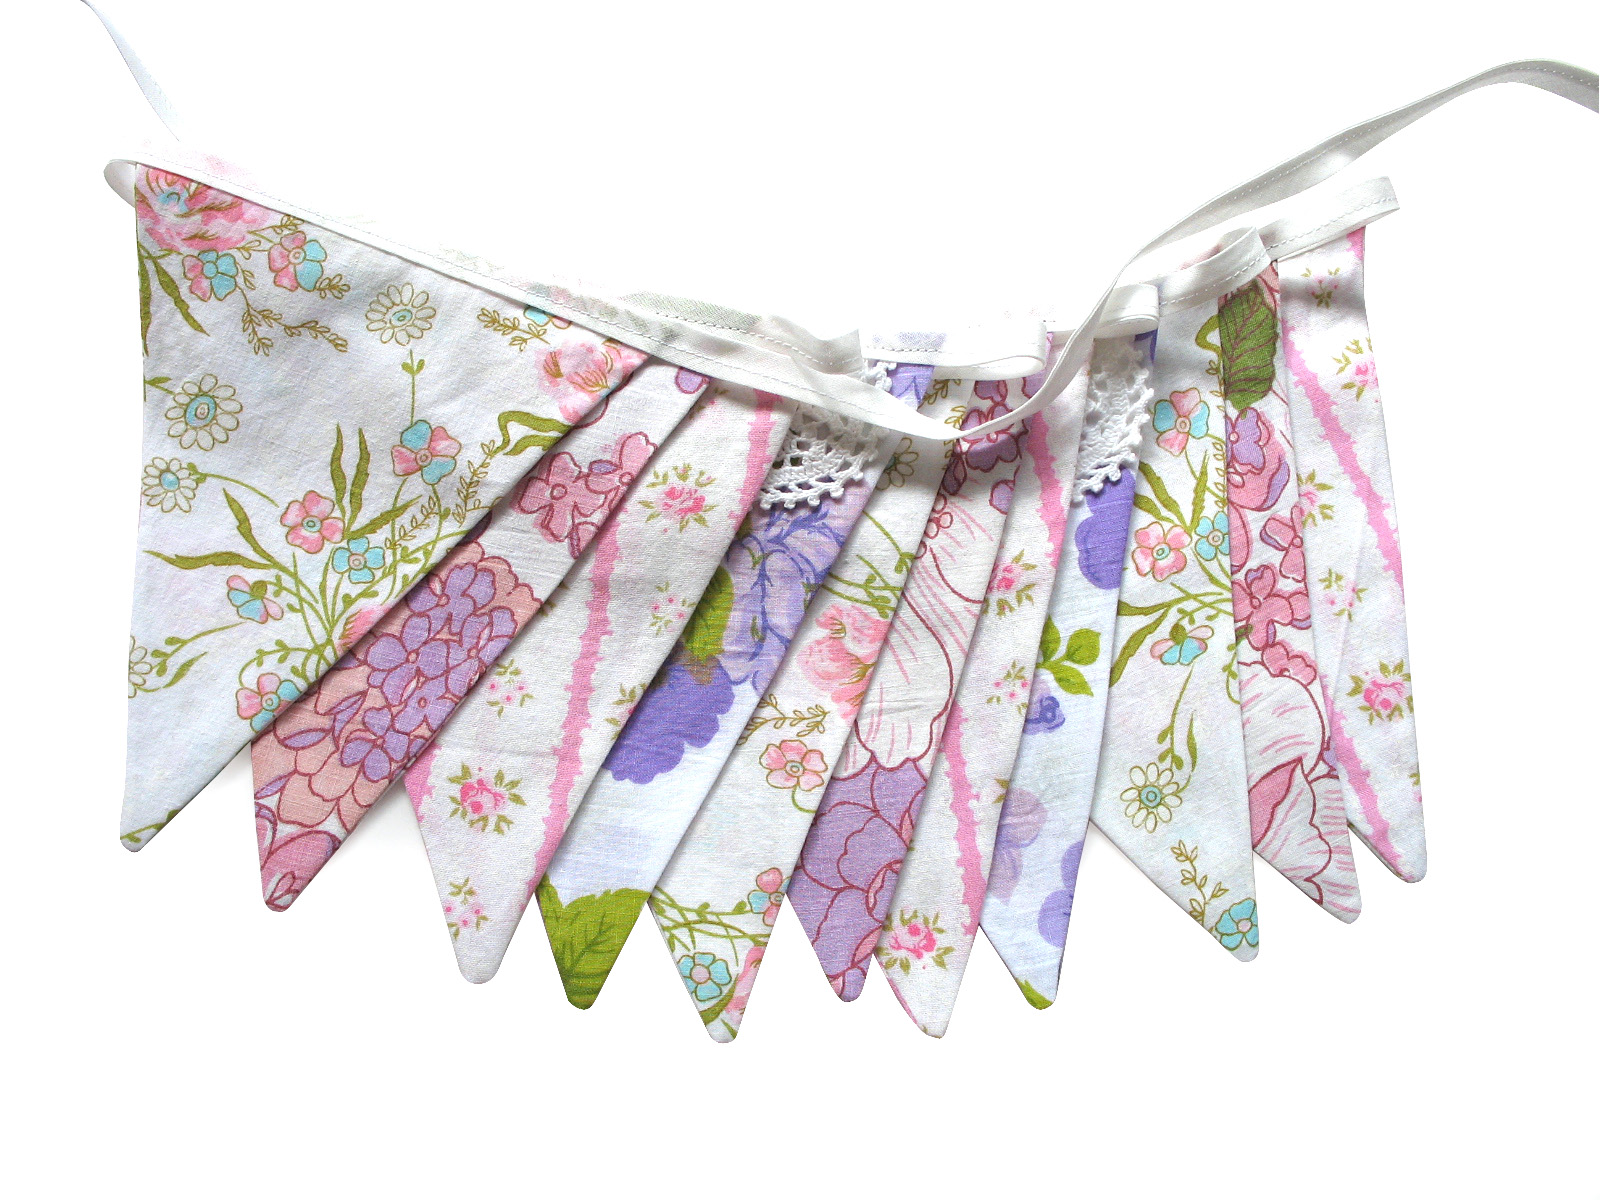 merry-go-round-handmade-vintage-floral-flag-bunting-ideal-for-a